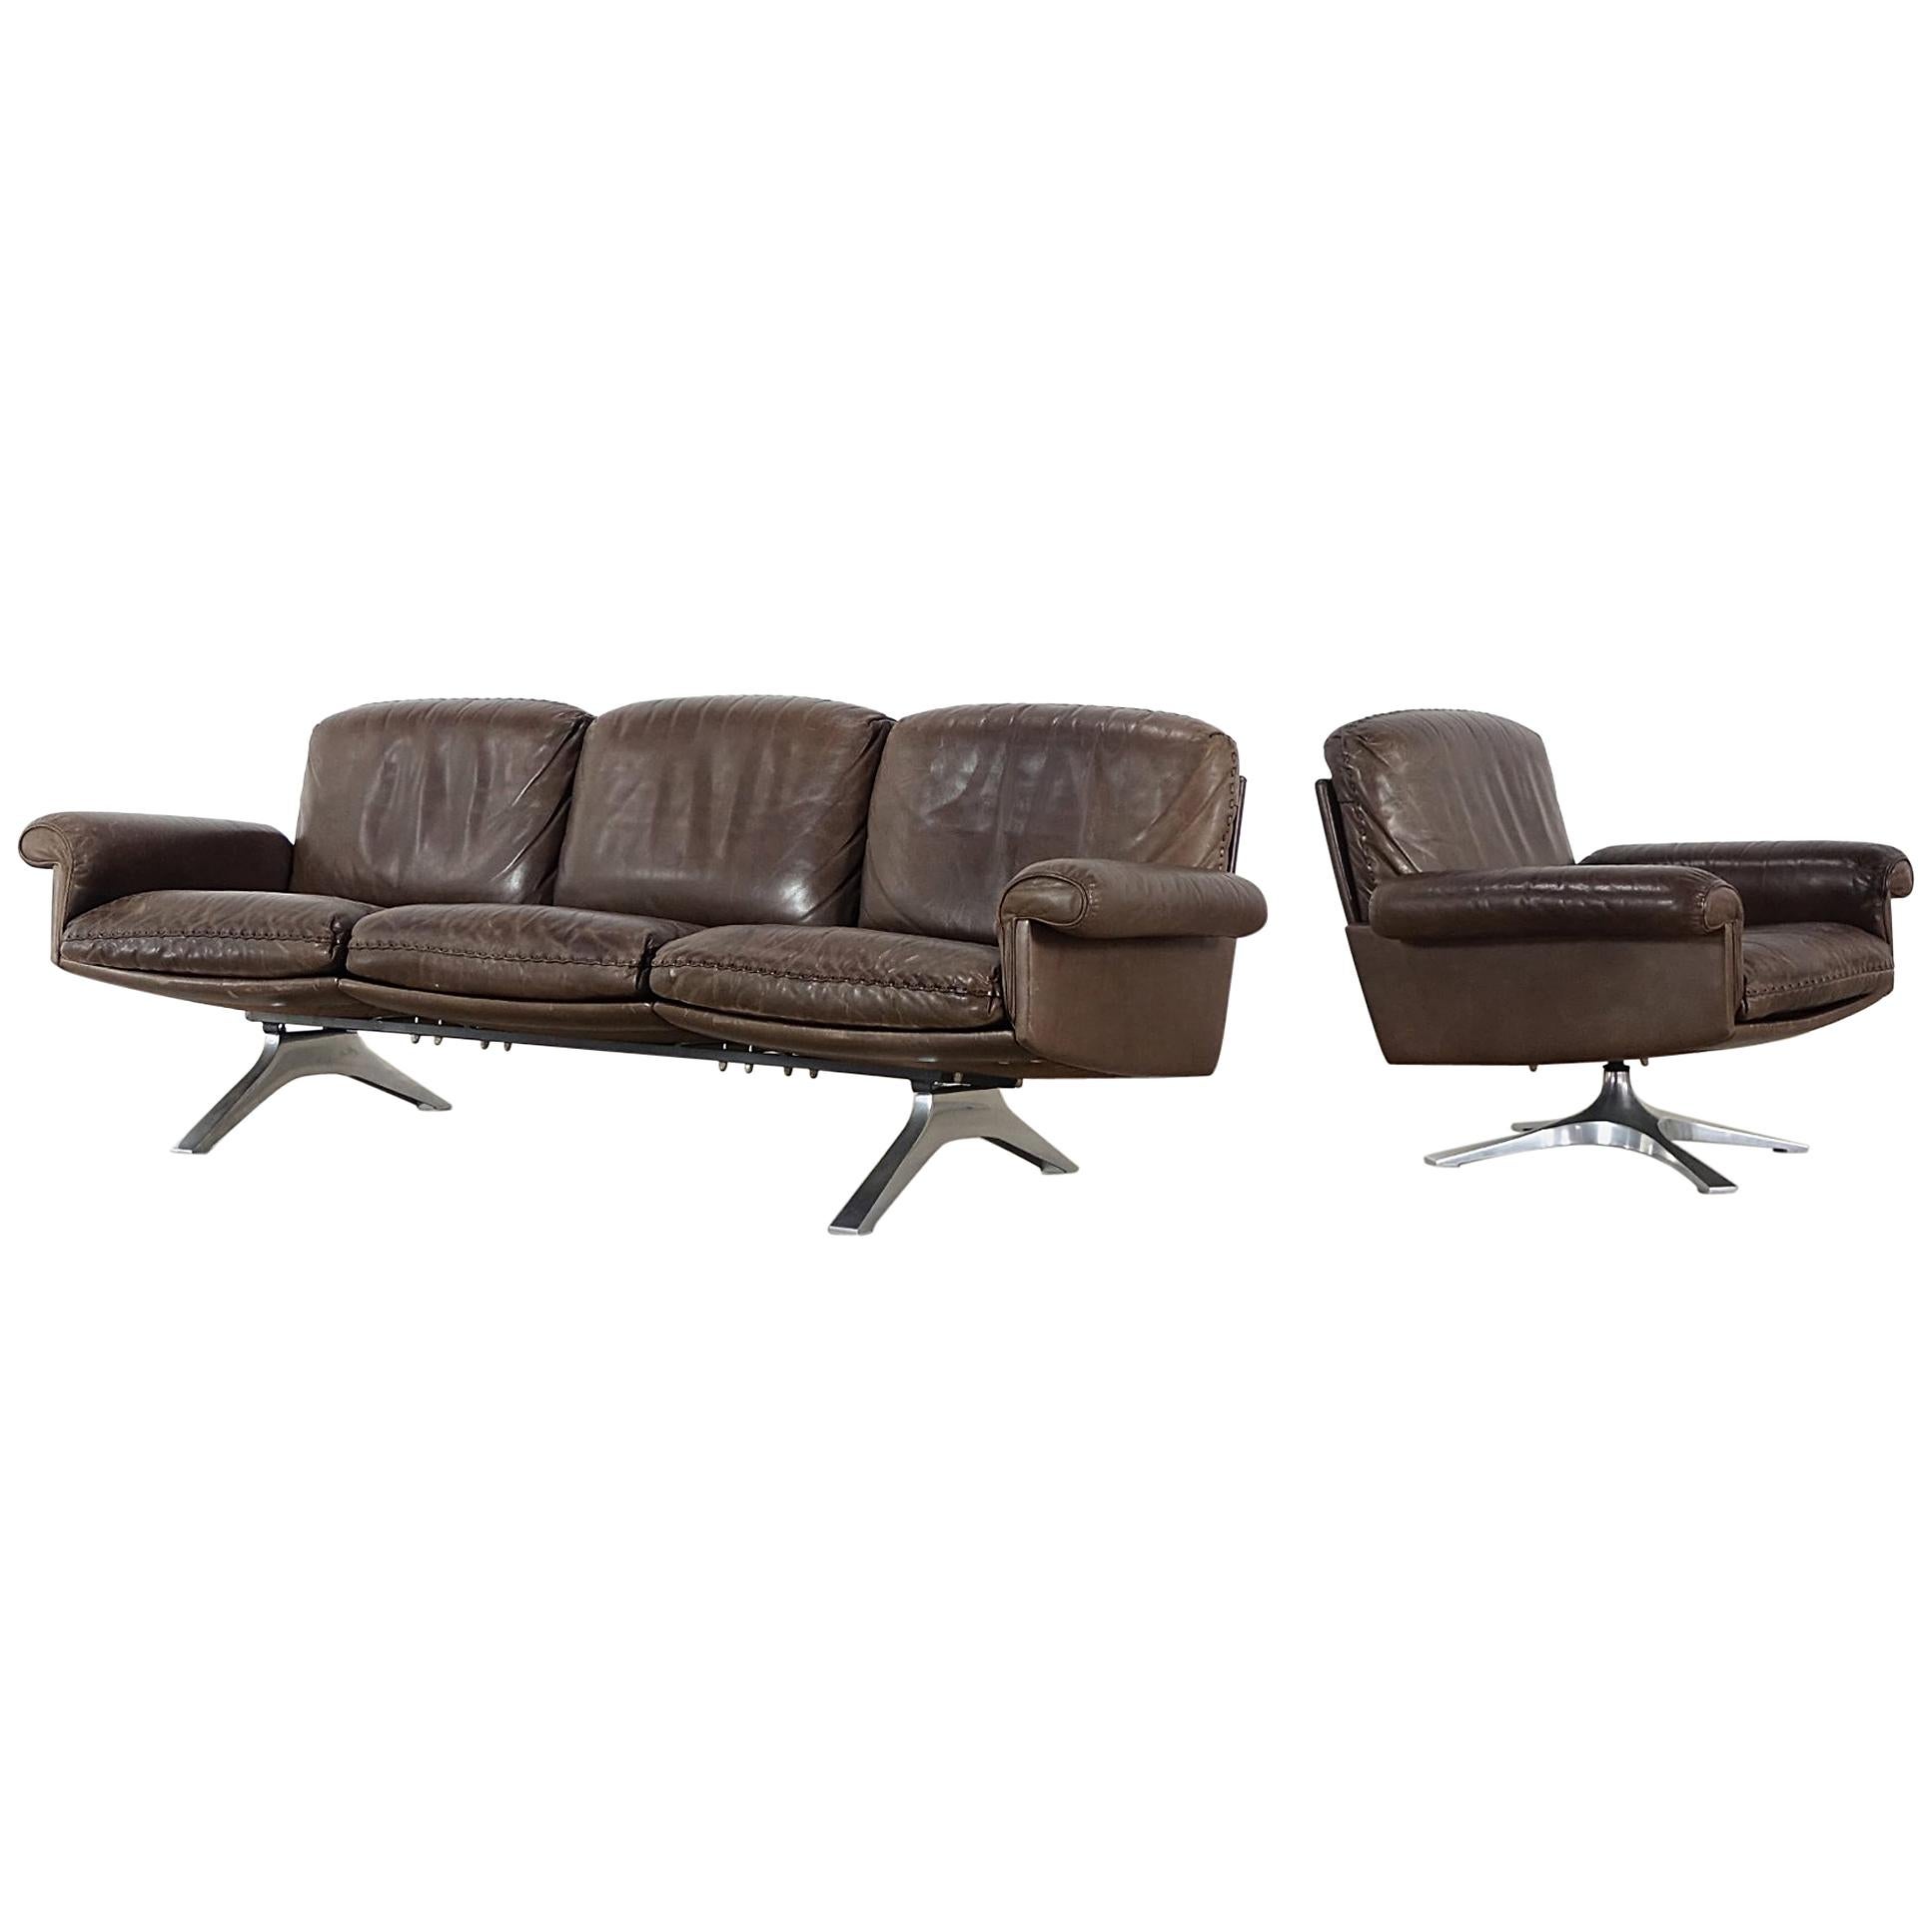 De Sede DS 31 Set of a Swivel Armchair and a Three-Seat Sofa from Switzerland